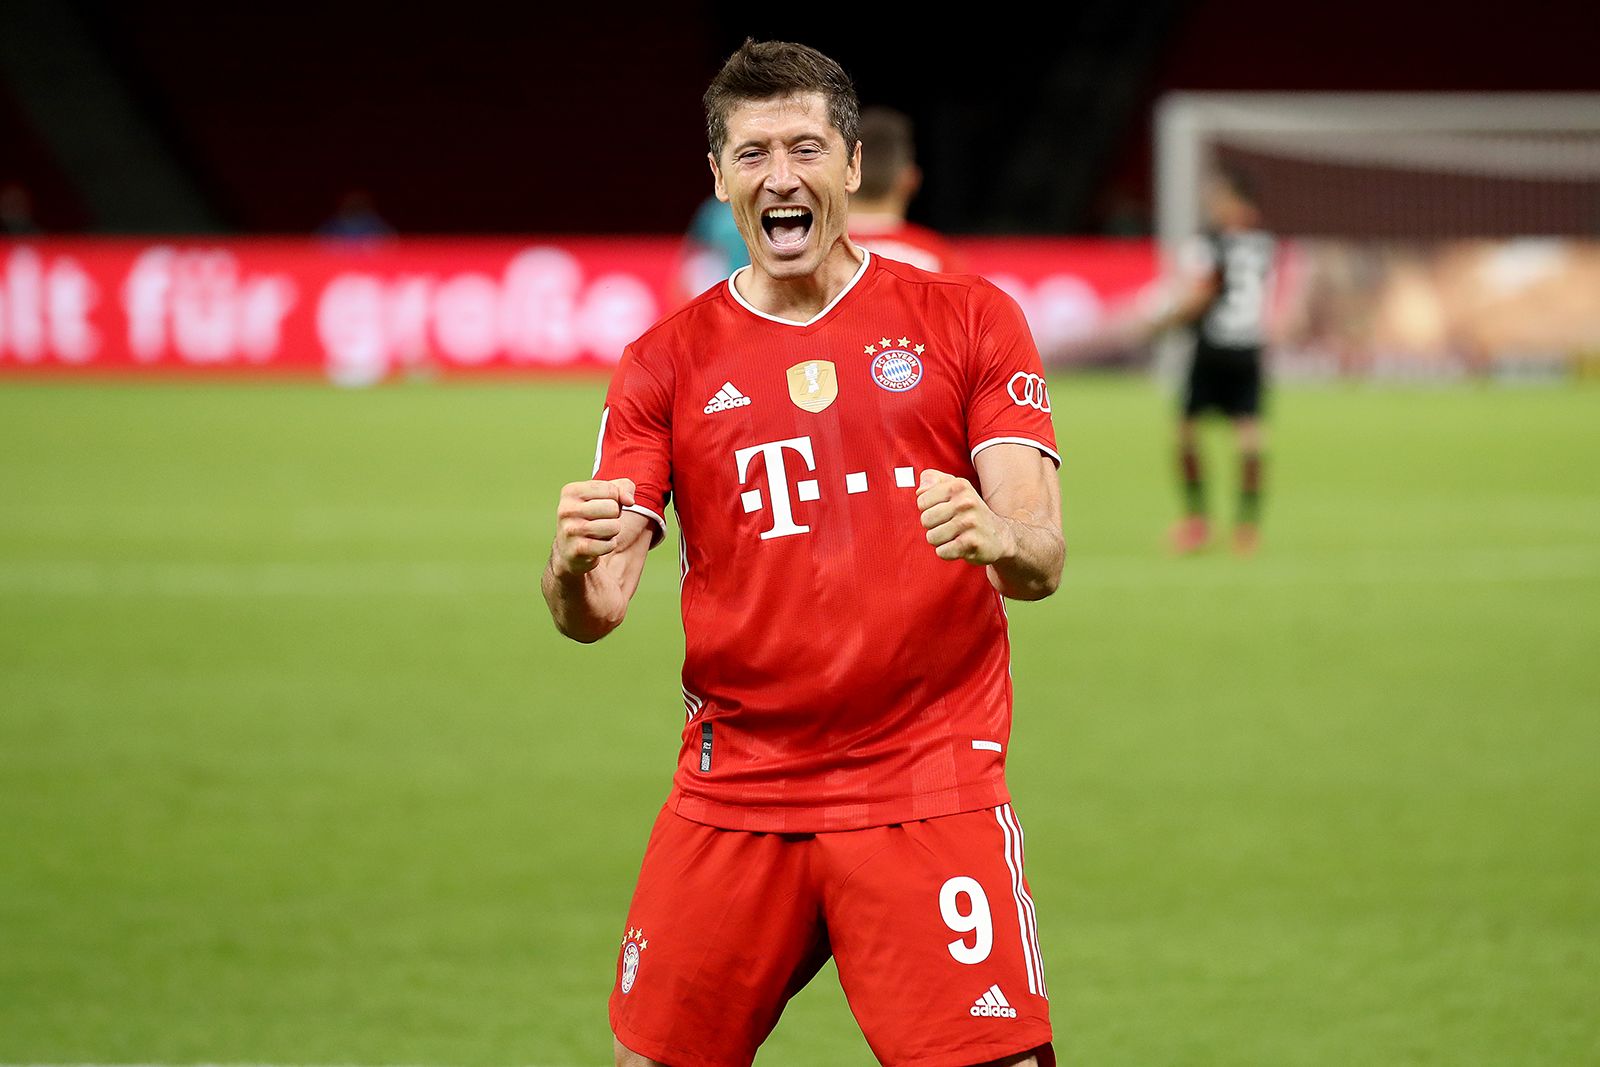 Bayern Munich vs Club Brugge in the Champions League should happen -  Bavarian Football Works